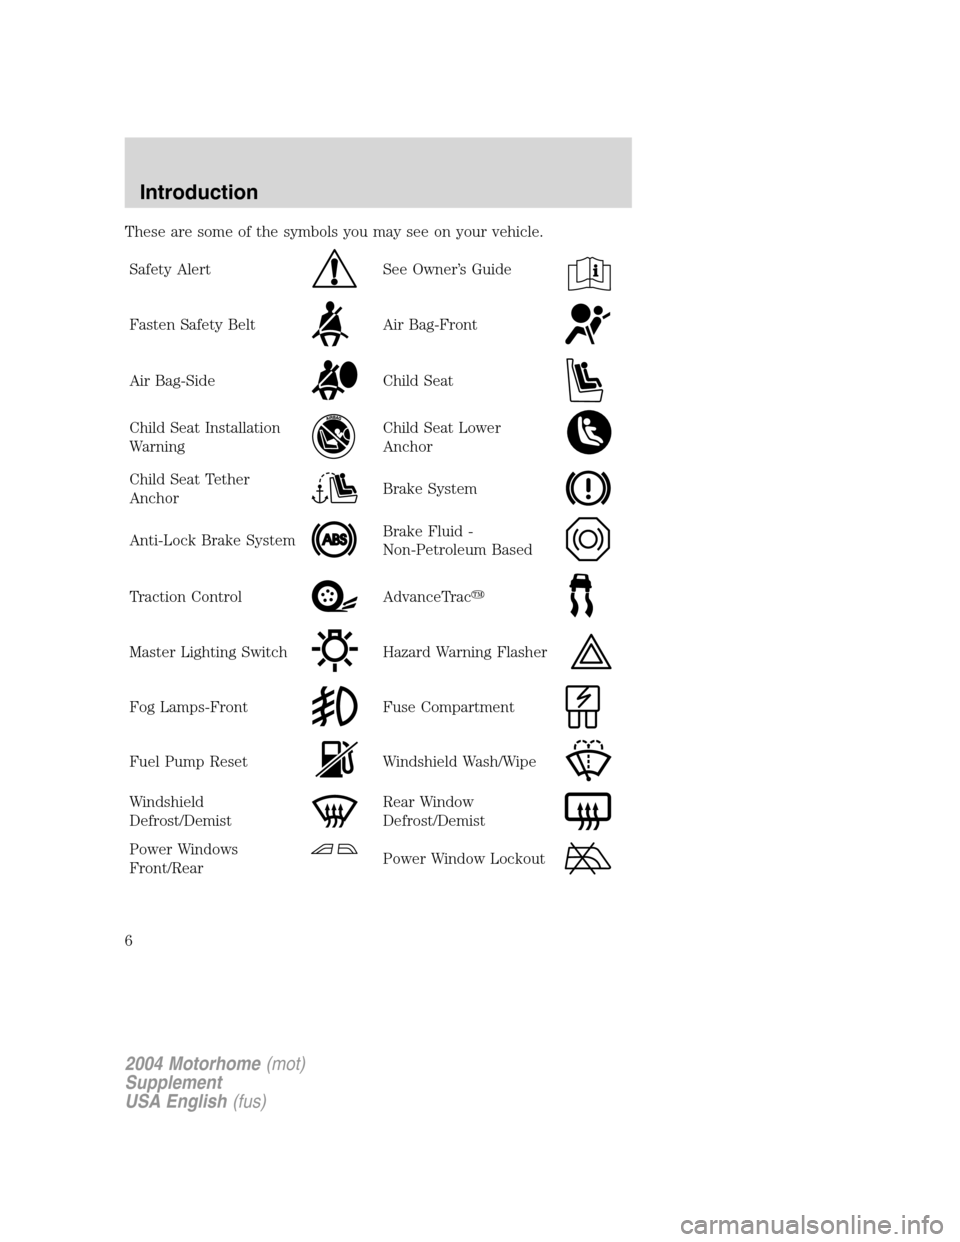 FORD F SERIES MOTORHOME AND COMMERCIAL CHASSIS 2004 11.G Owners Manual These are some of the symbols you may see on your vehicle.
Safety Alert
See Owner’s Guide
Fasten Safety BeltAir Bag-Front
Air Bag-SideChild Seat
Child Seat Installation
WarningChild Seat Lower
Ancho